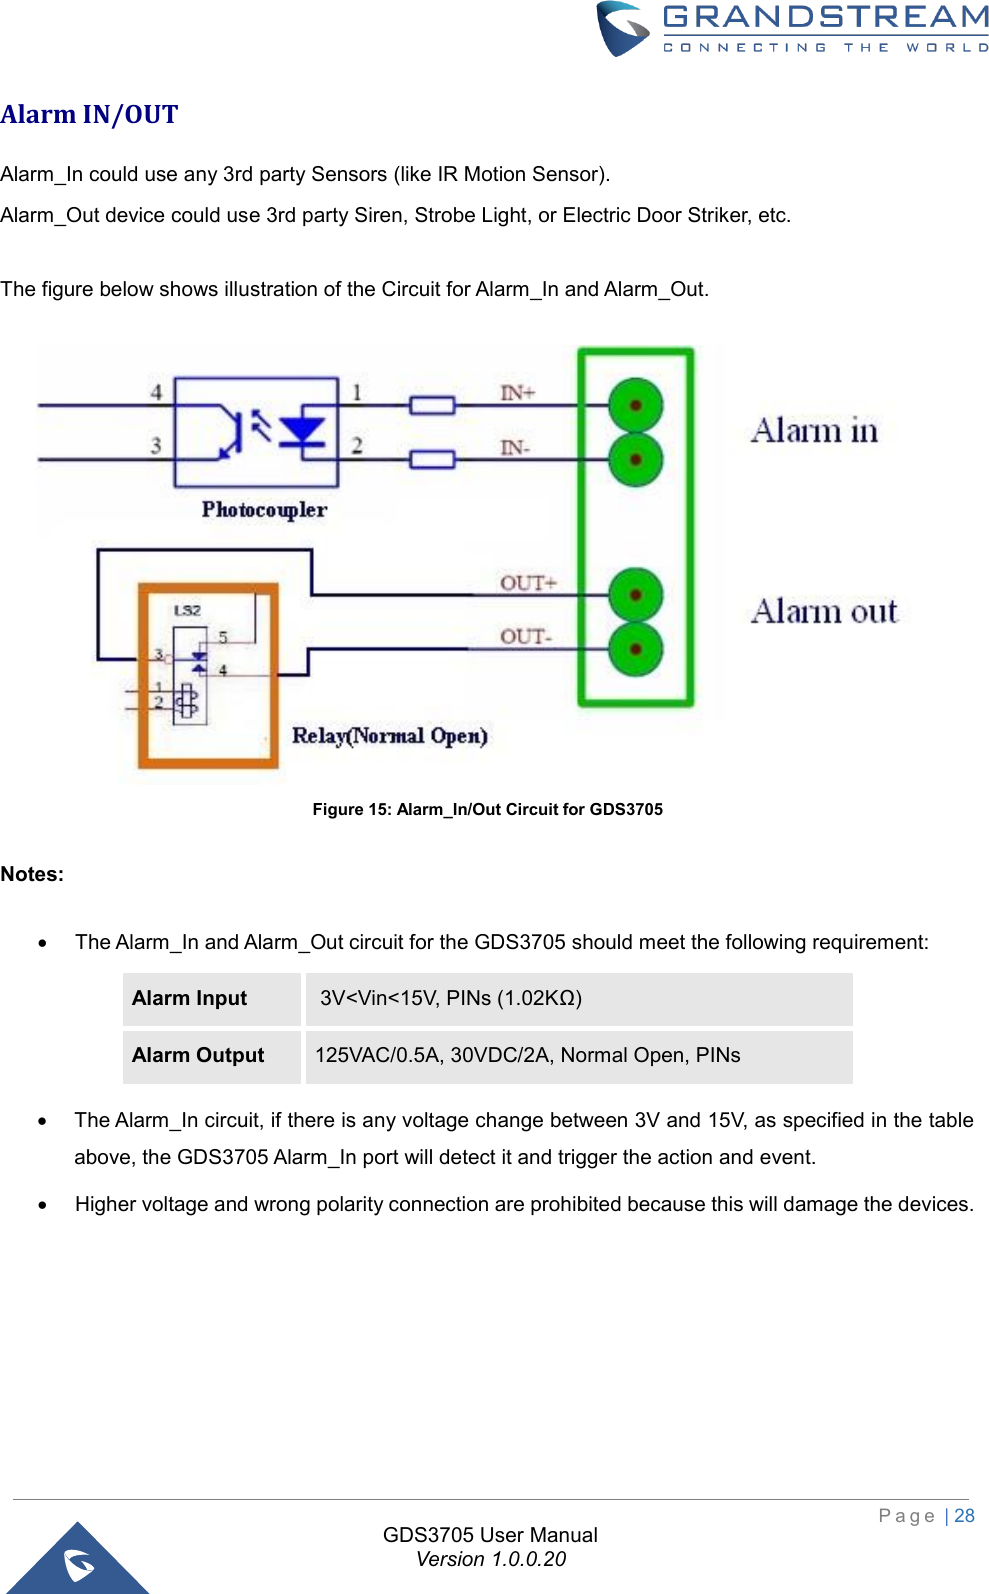                                                                         P a g e  | 28  GDS3705 User Manual Version 1.0.0.20 Alarm IN/OUT Alarm_In could use any 3rd party Sensors (like IR Motion Sensor). Alarm_Out device could use 3rd party Siren, Strobe Light, or Electric Door Striker, etc.   The figure below shows illustration of the Circuit for Alarm_In and Alarm_Out.   Figure 15: Alarm_In/Out Circuit for GDS3705  Notes:  • The Alarm_In and Alarm_Out circuit for the GDS3705 should meet the following requirement: Alarm Input  3V&lt;Vin&lt;15V, PINs (1.02KΩ) Alarm Output 125VAC/0.5A, 30VDC/2A, Normal Open, PINs • The Alarm_In circuit, if there is any voltage change between 3V and 15V, as specified in the table above, the GDS3705 Alarm_In port will detect it and trigger the action and event.  • Higher voltage and wrong polarity connection are prohibited because this will damage the devices.    